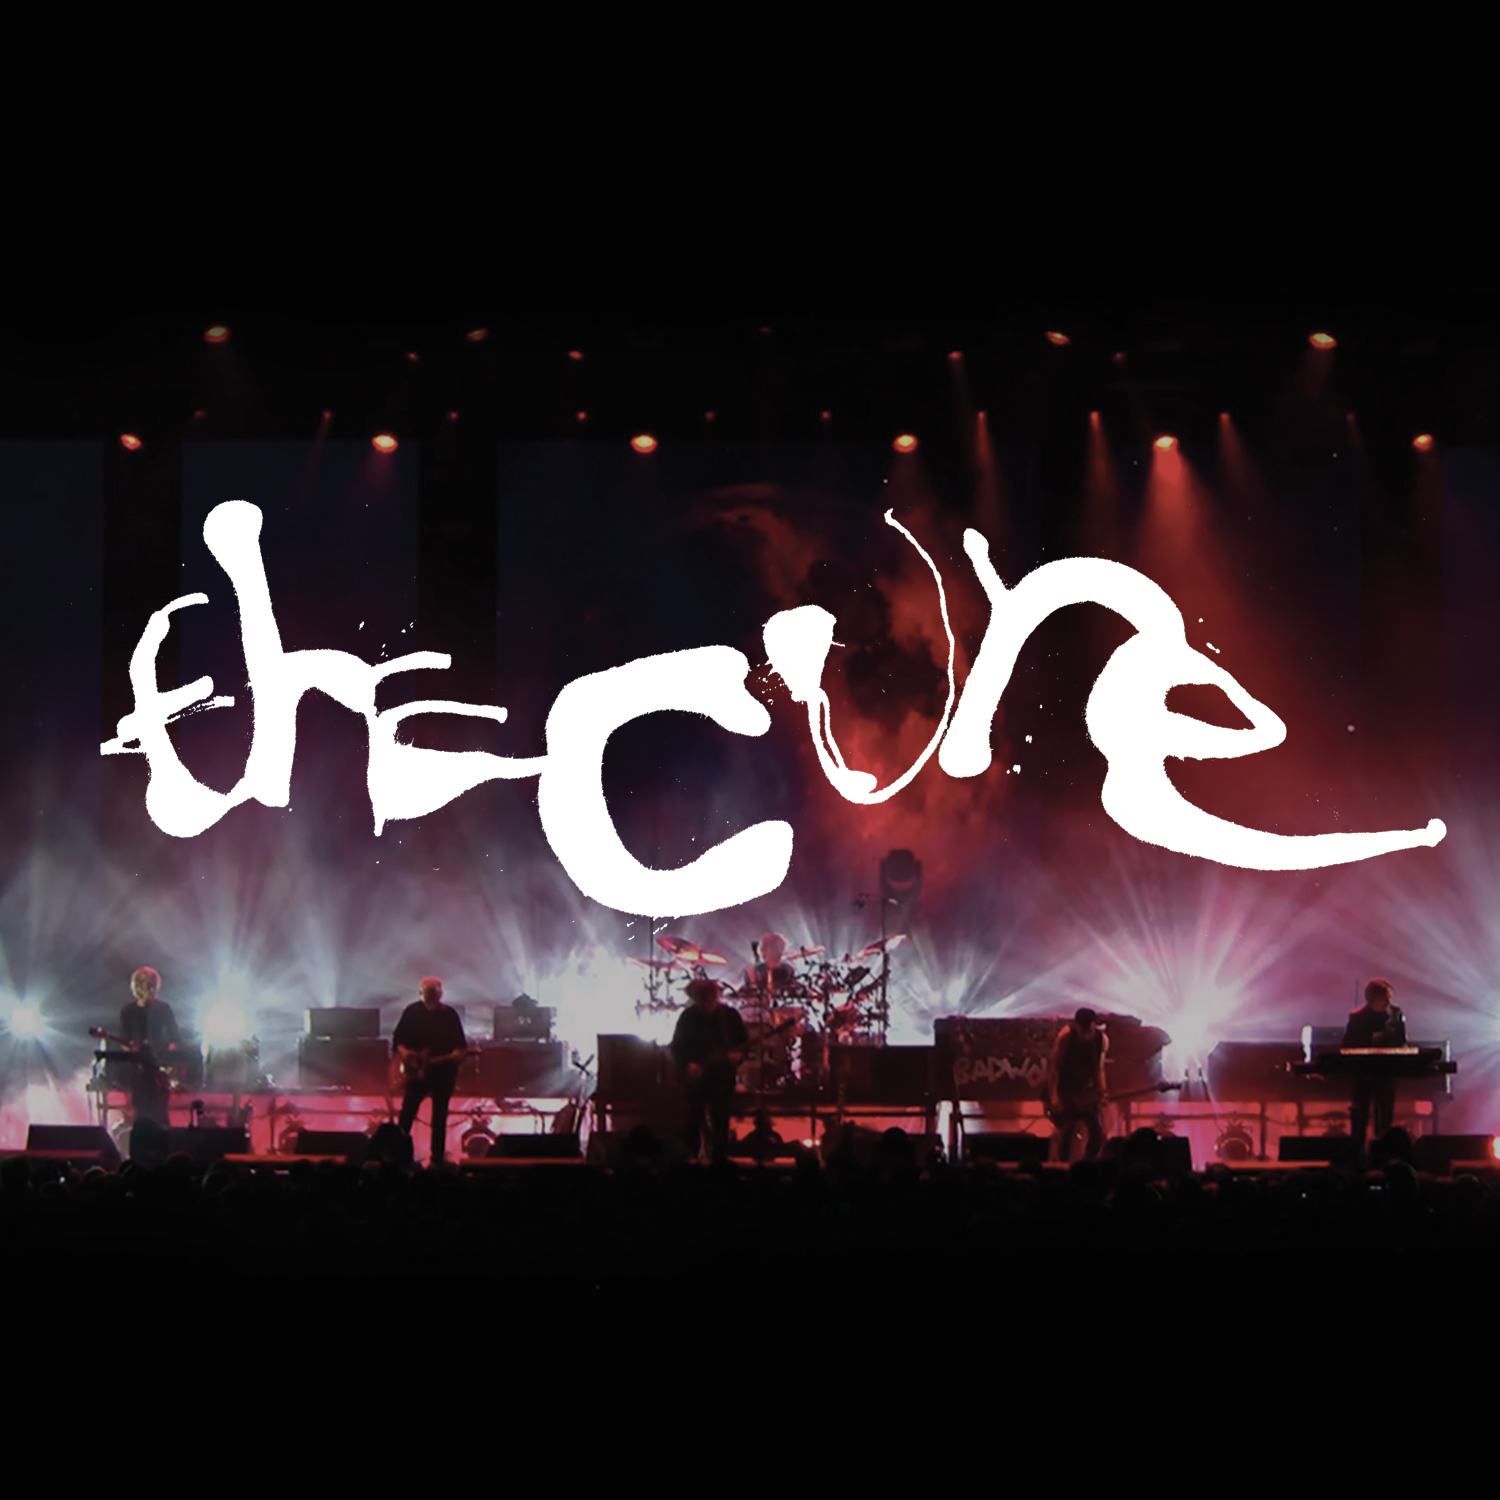 The Cure  'PARIS' 30TH ANNIVERSARY RELEASE ANNOUNCED